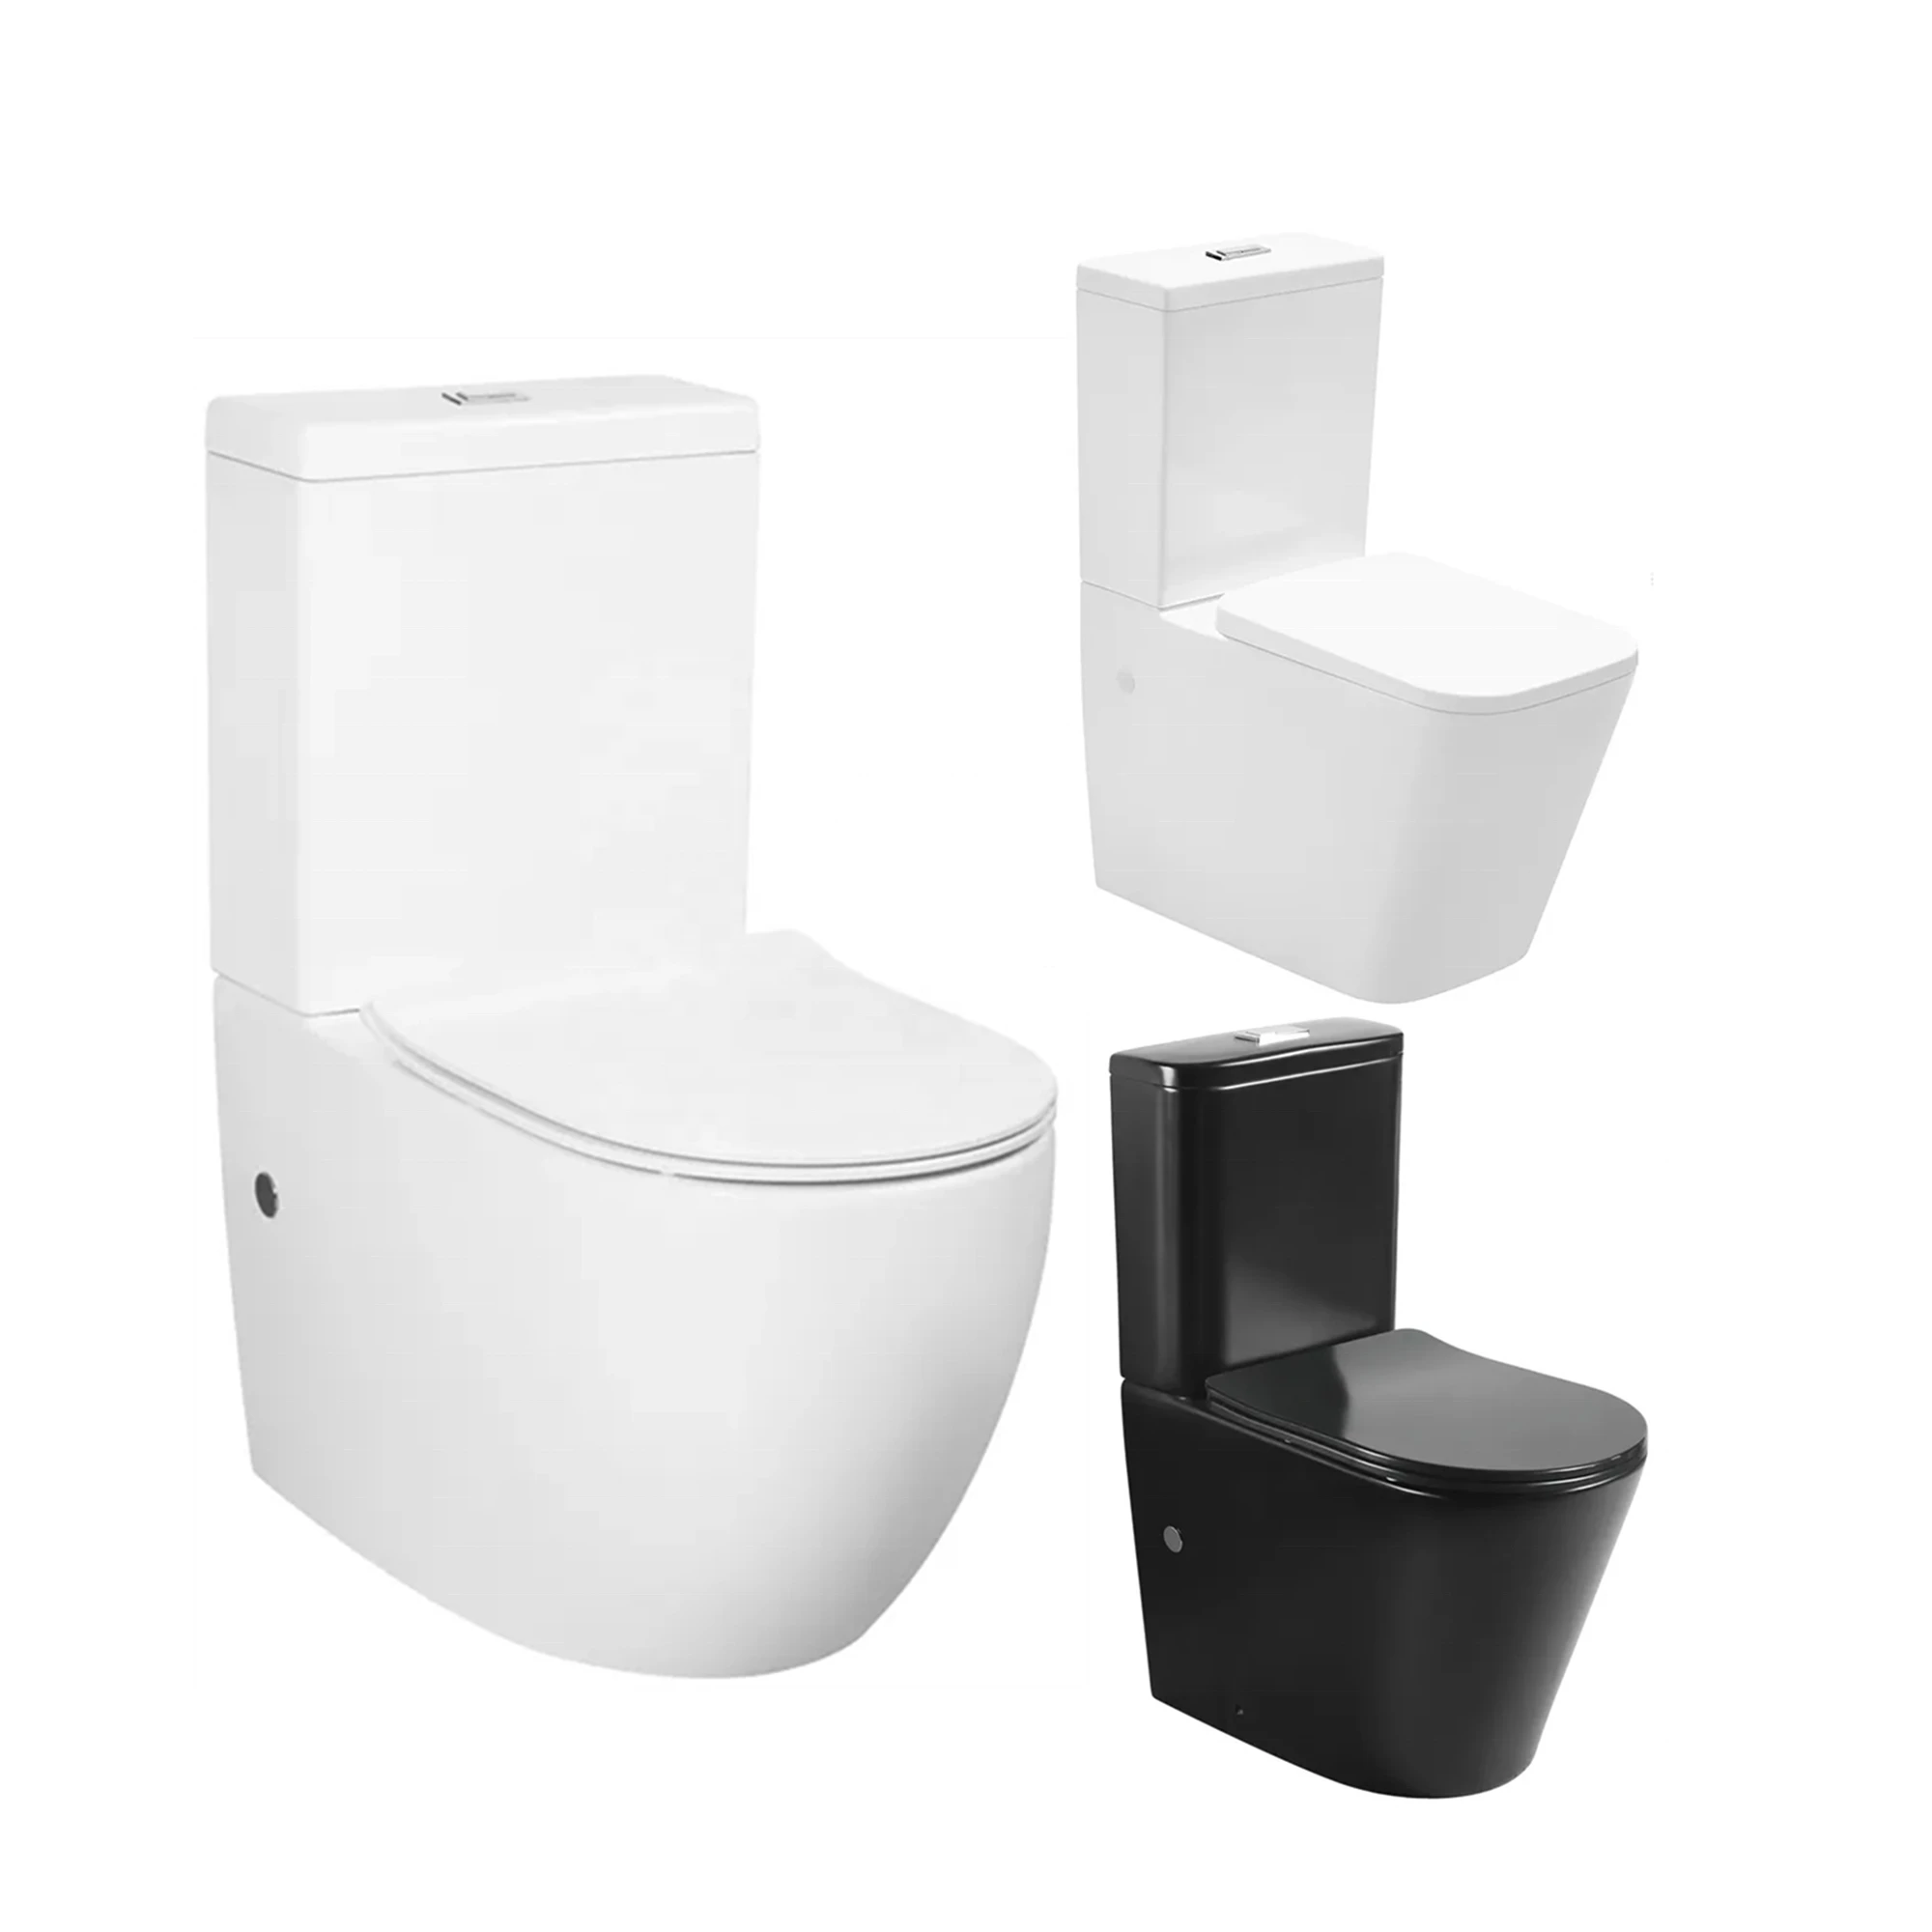 Chinese modern sanitary ware bathroom ceramic black wc piss two piece toilet set